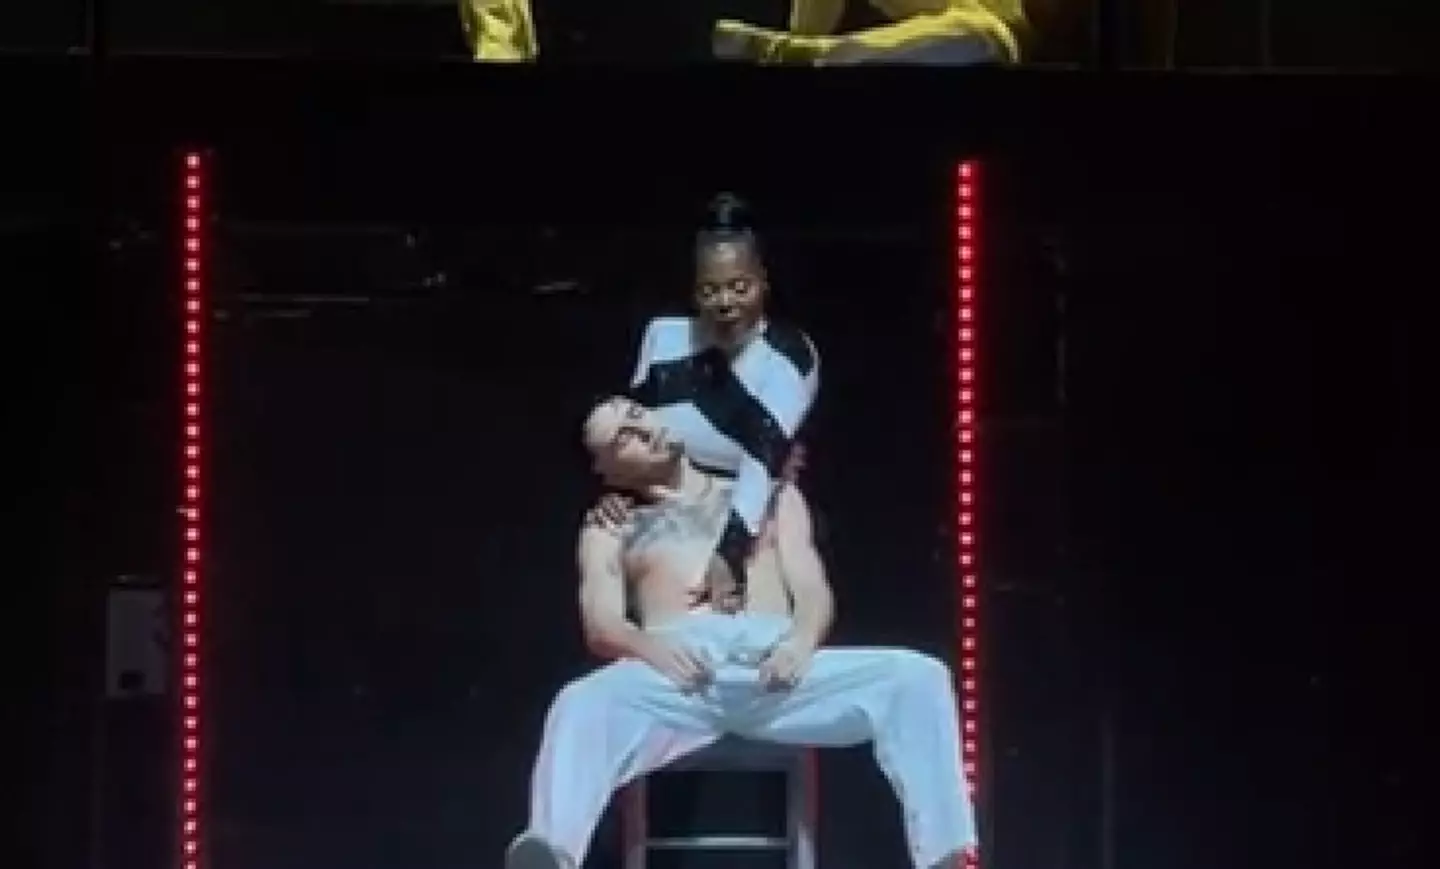 Janet Jackson was performing on stage when her hand plunged down a backup dancer's body.